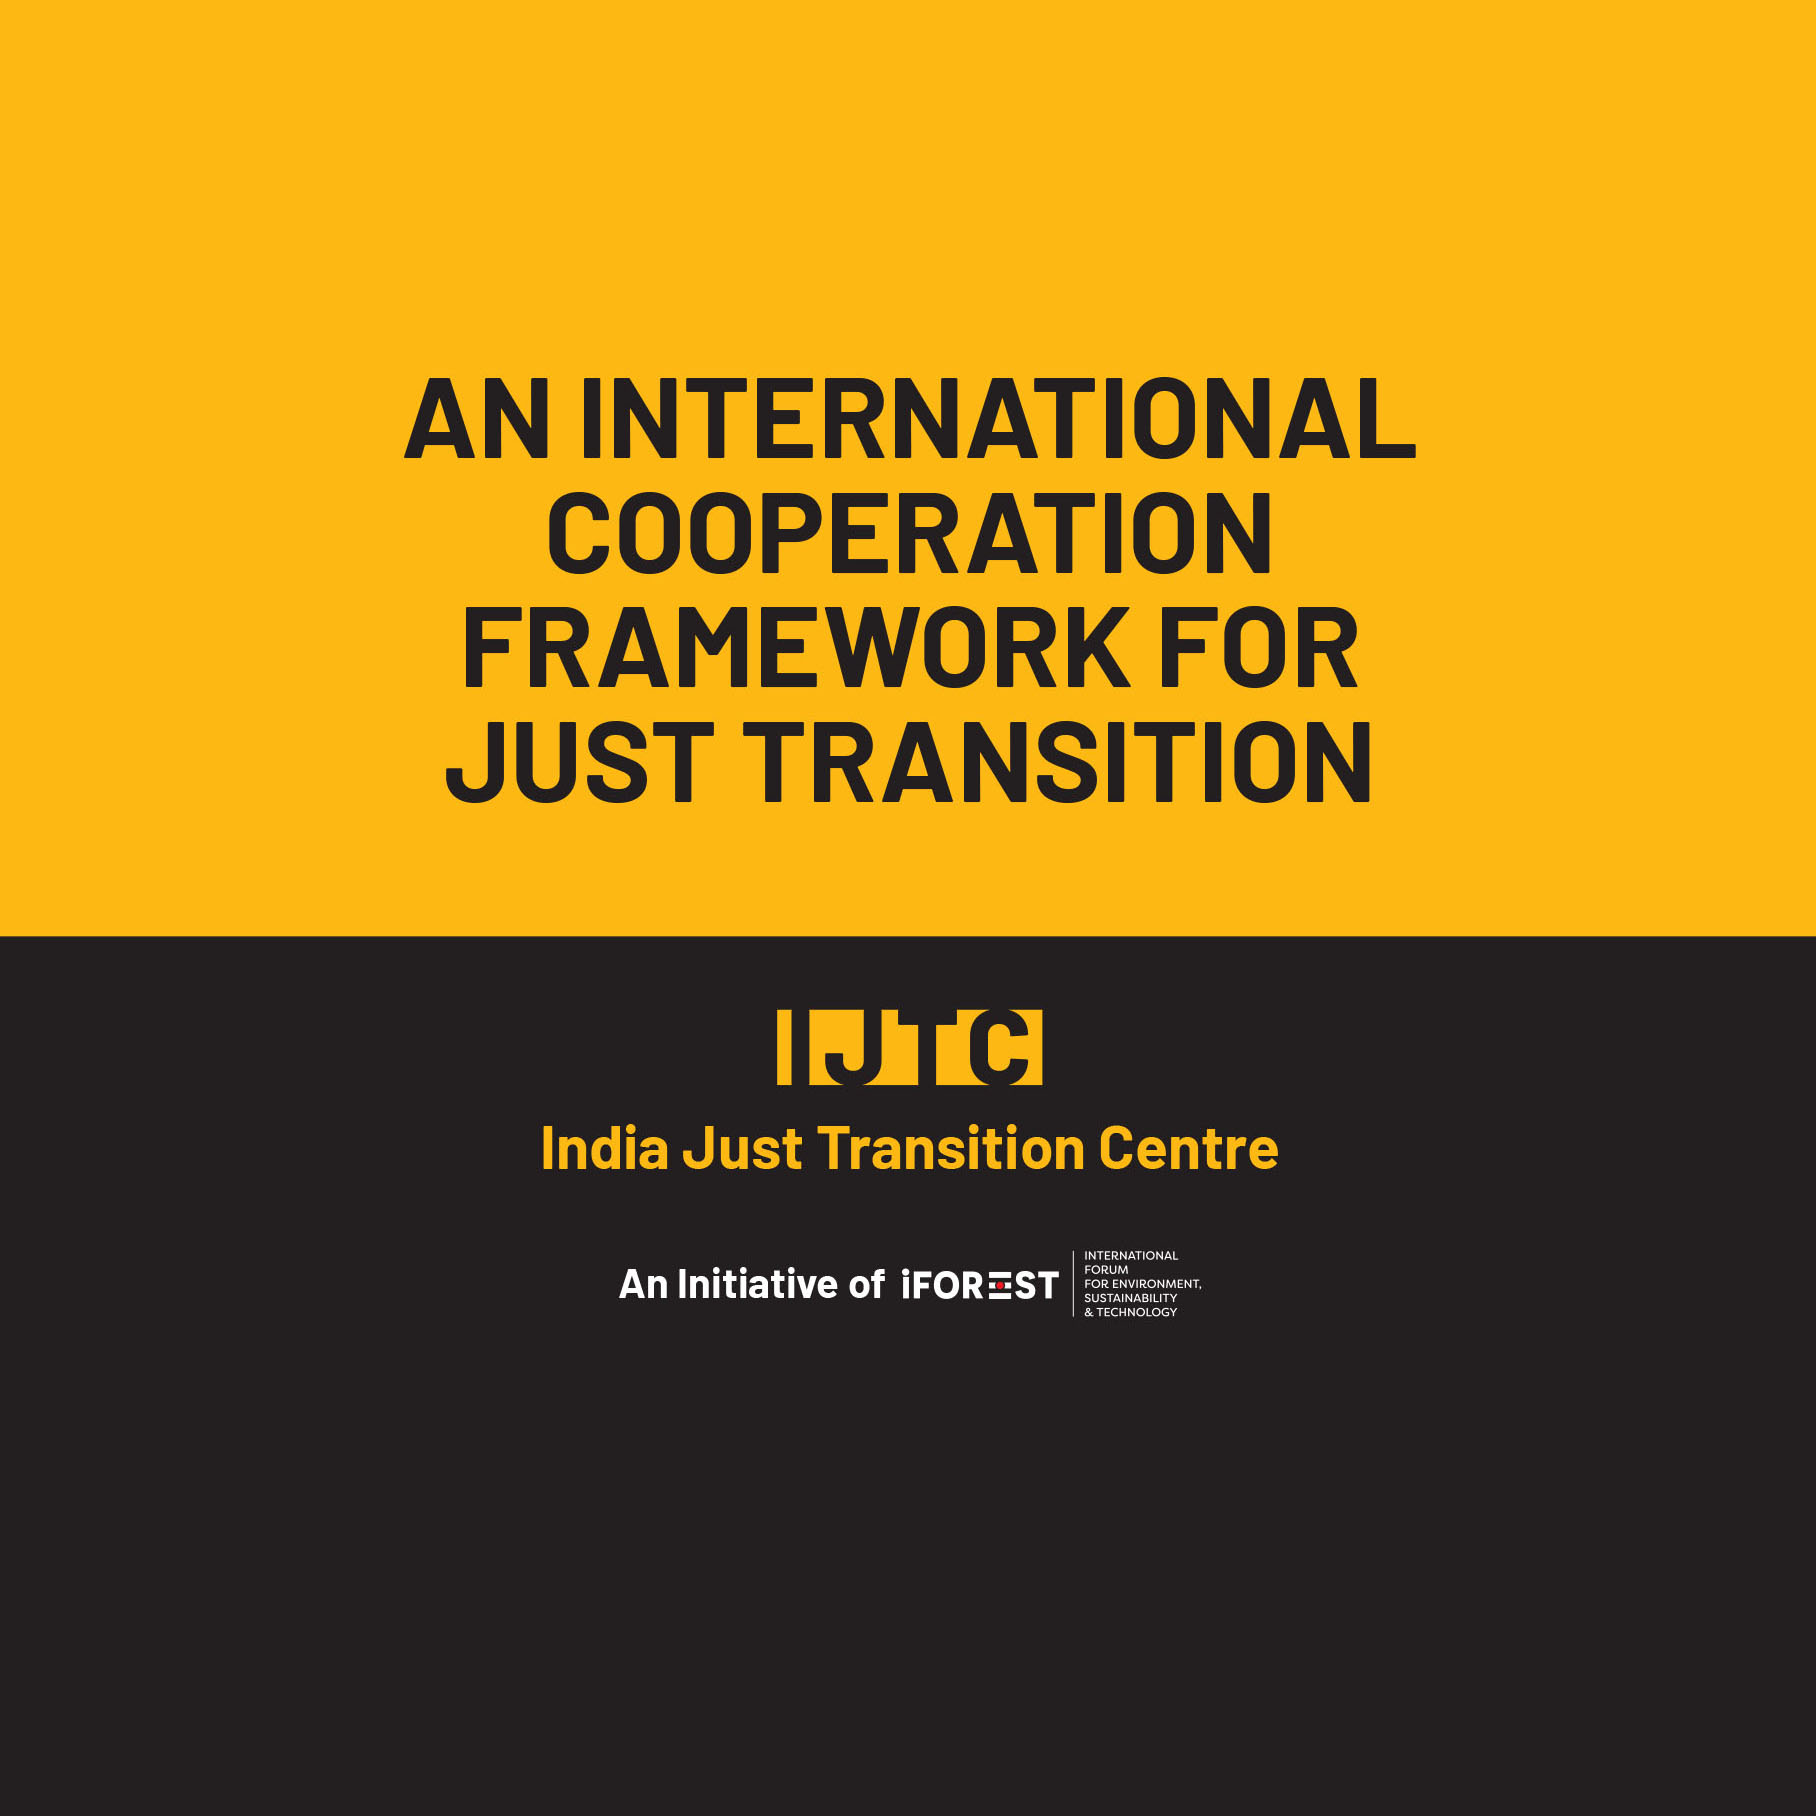 Working Paper - An International Cooperation Framework for Just Transition